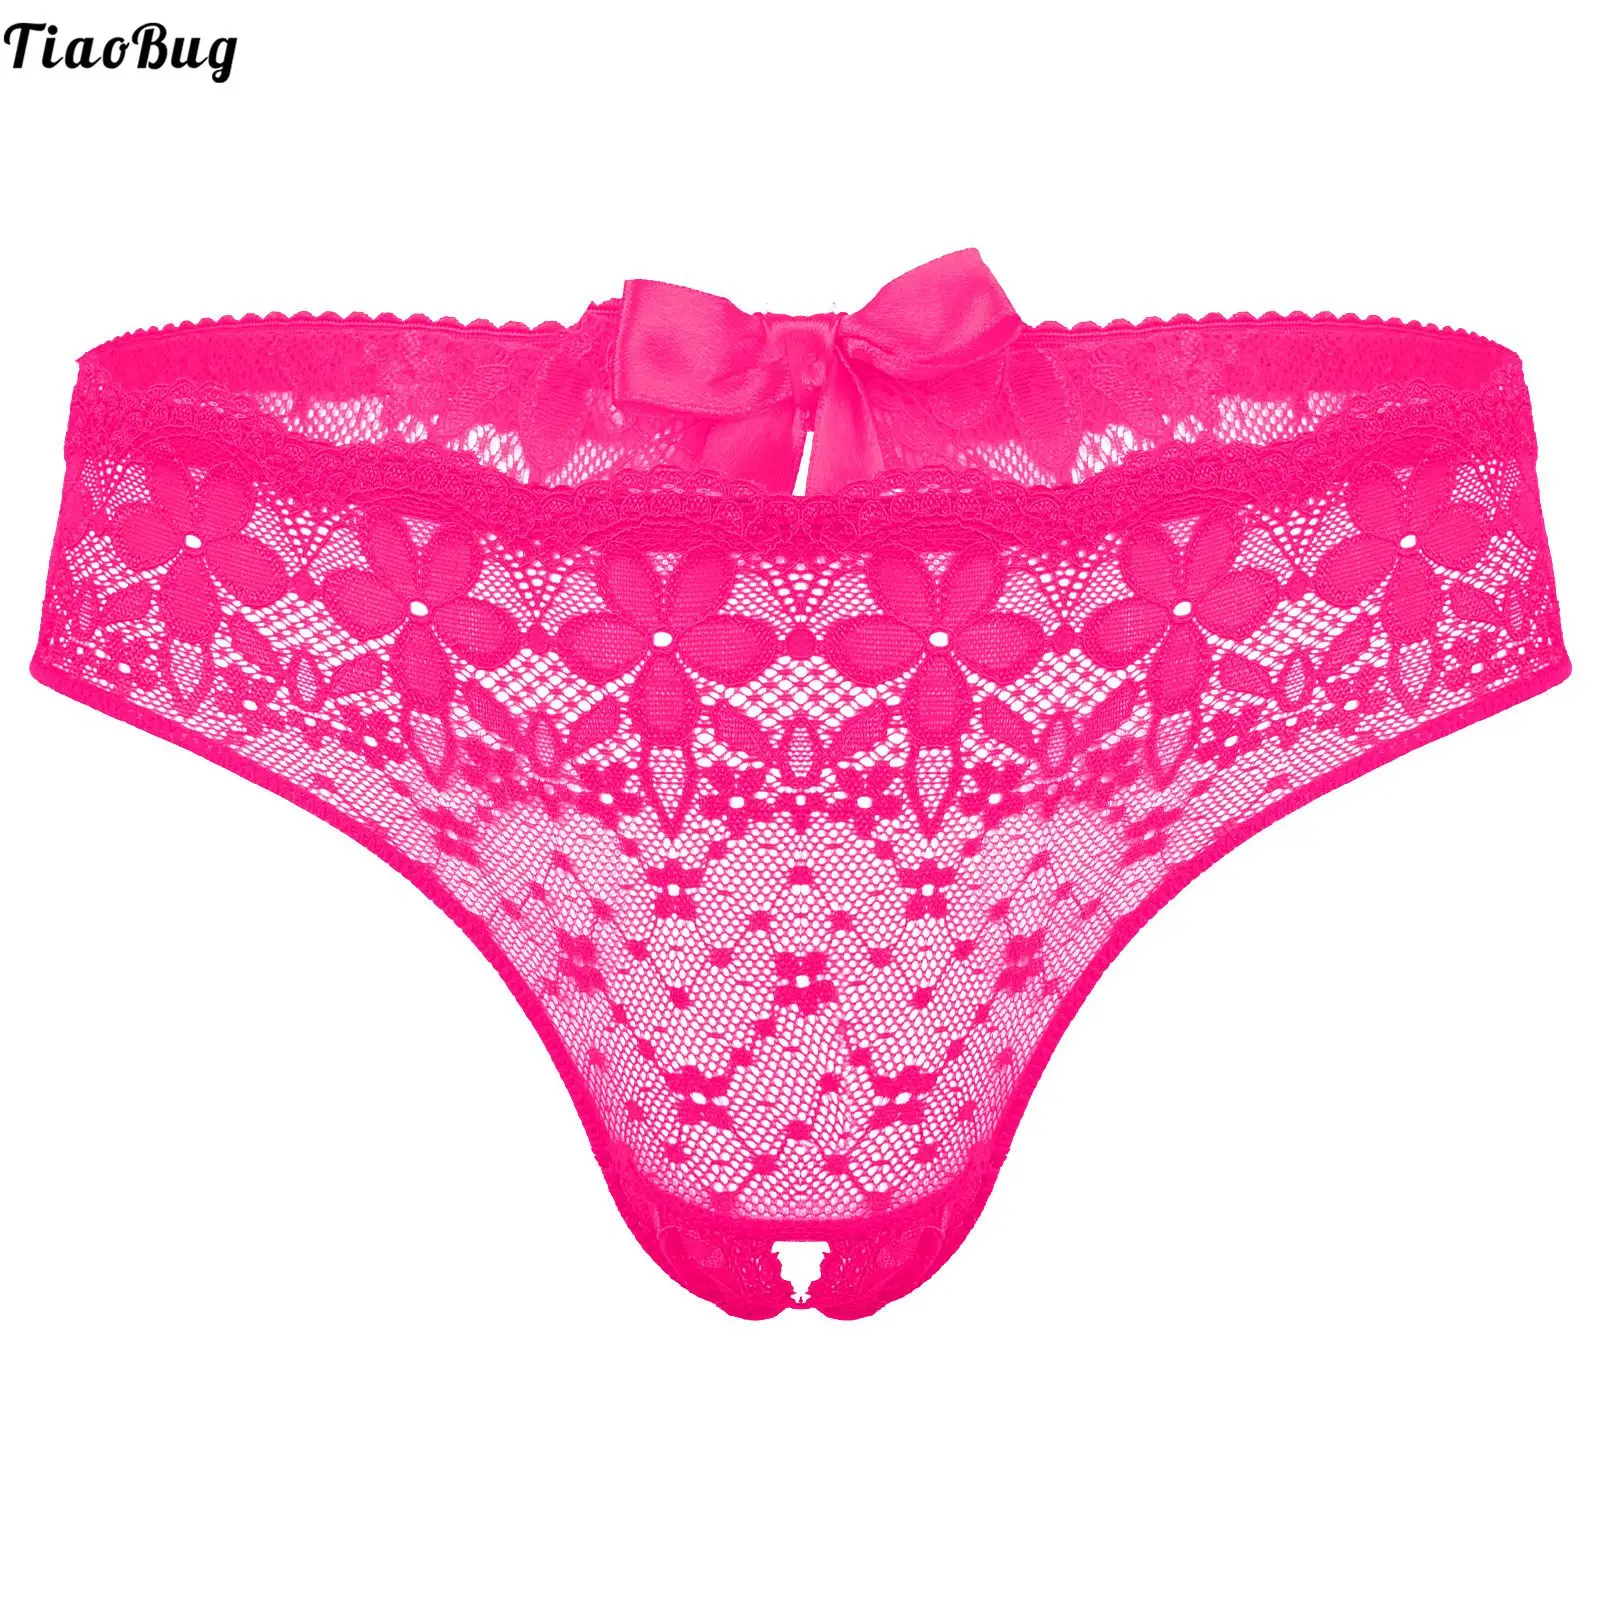 

TiaoBug Men Sissy Gay Lace Crotchless Briefs Bowknot Low Rise Lingerie Undershorts Underwear See-Through Underpants